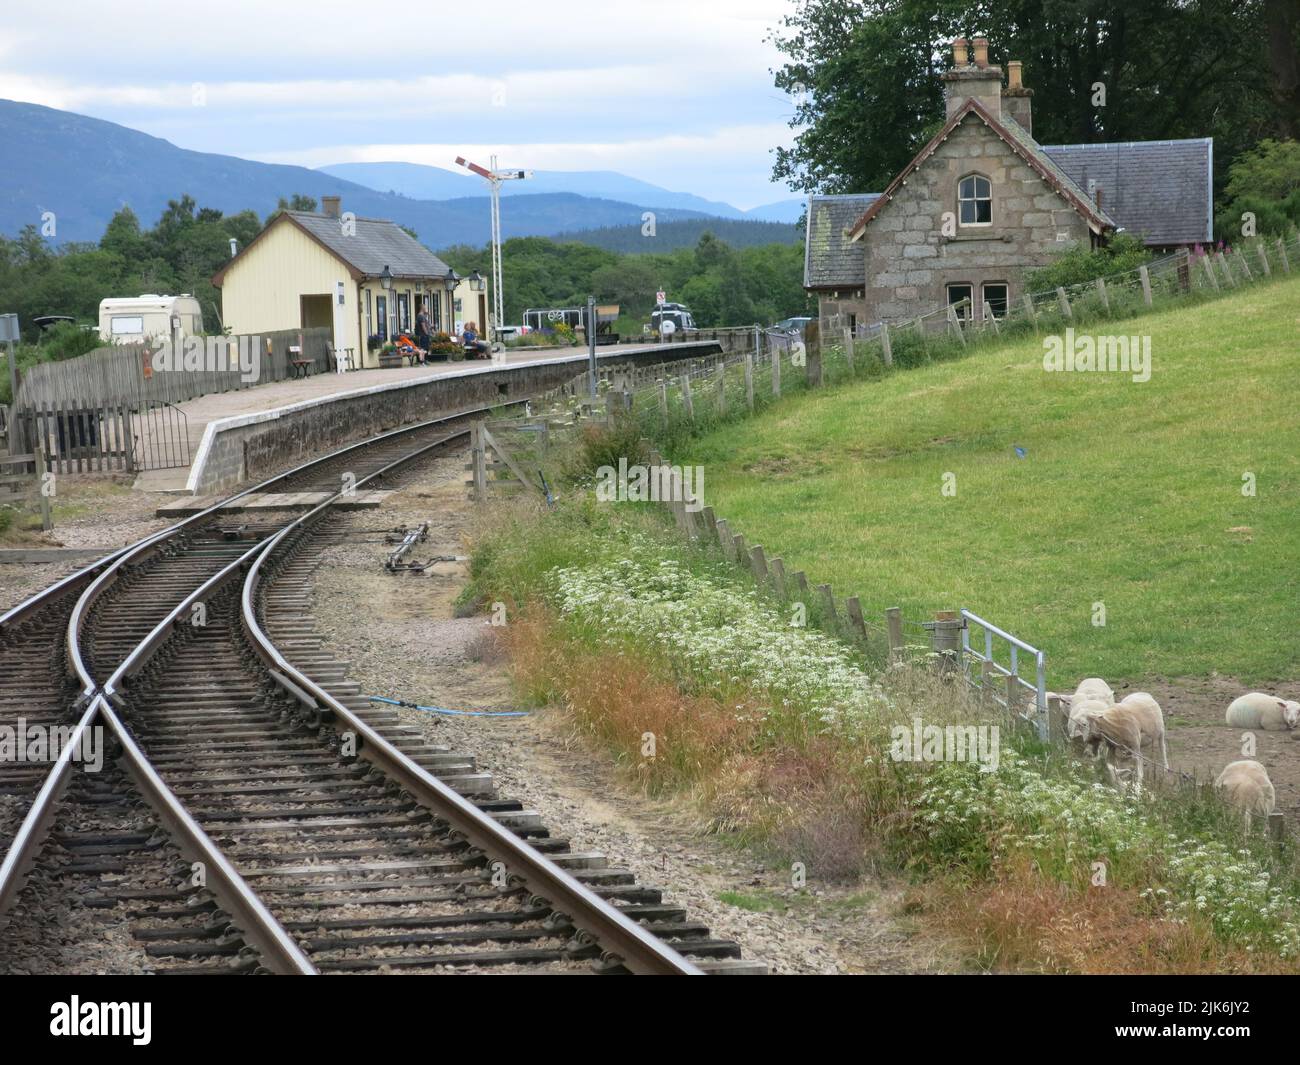 View of the railway line and one of the stations on the heritage steam Strathspey Railway which runs through the Scottish Highlands from Aviemore. Stock Photo